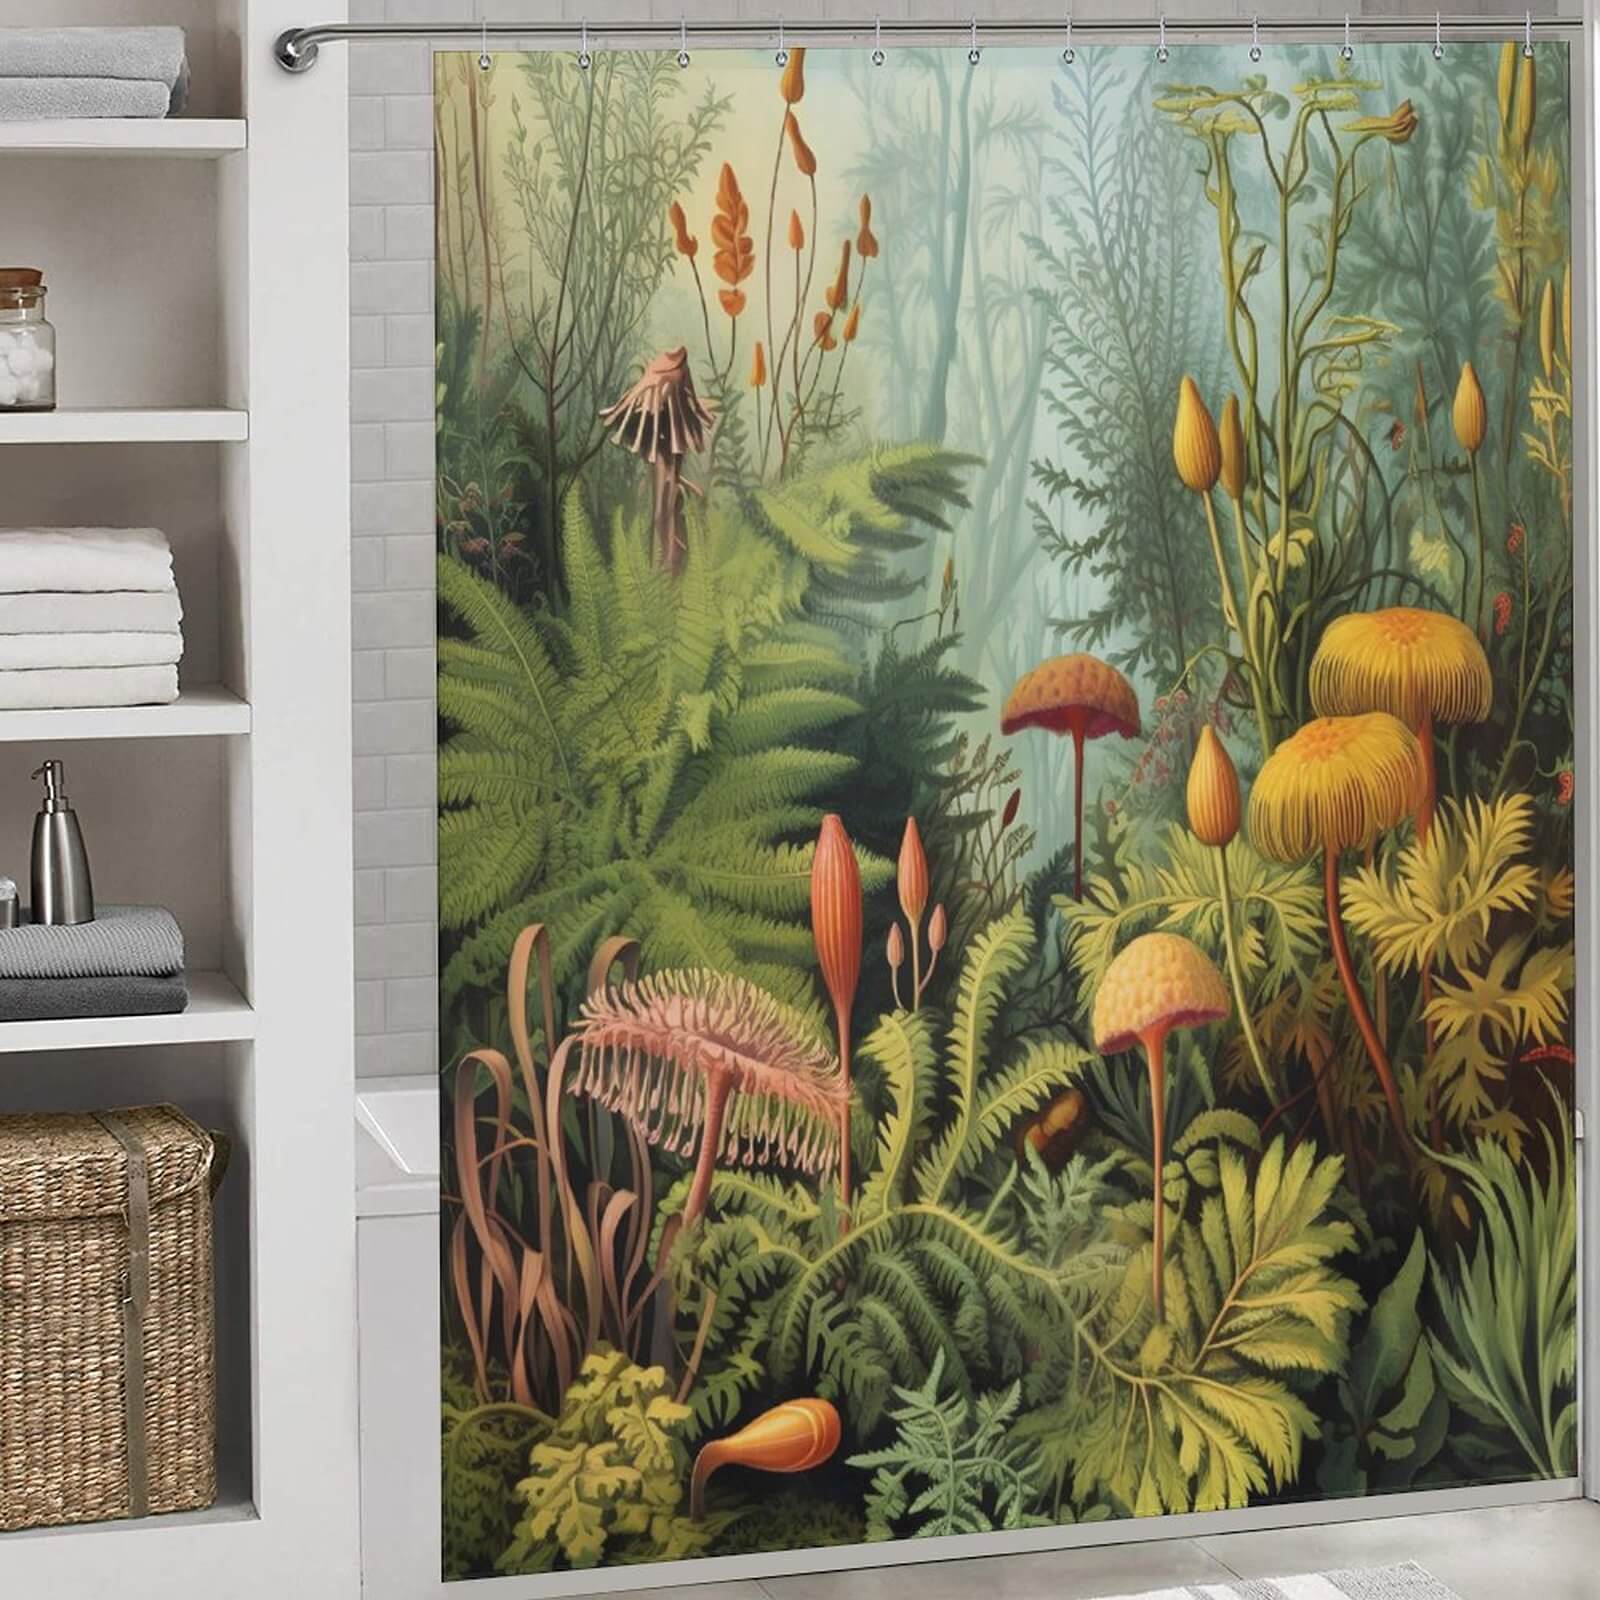 A Mushroom Jungle Shower Curtain from Cotton Cat, adorned with a lively painting of plants and mushrooms, creates a whimsical jungle atmosphere in your bathroom.